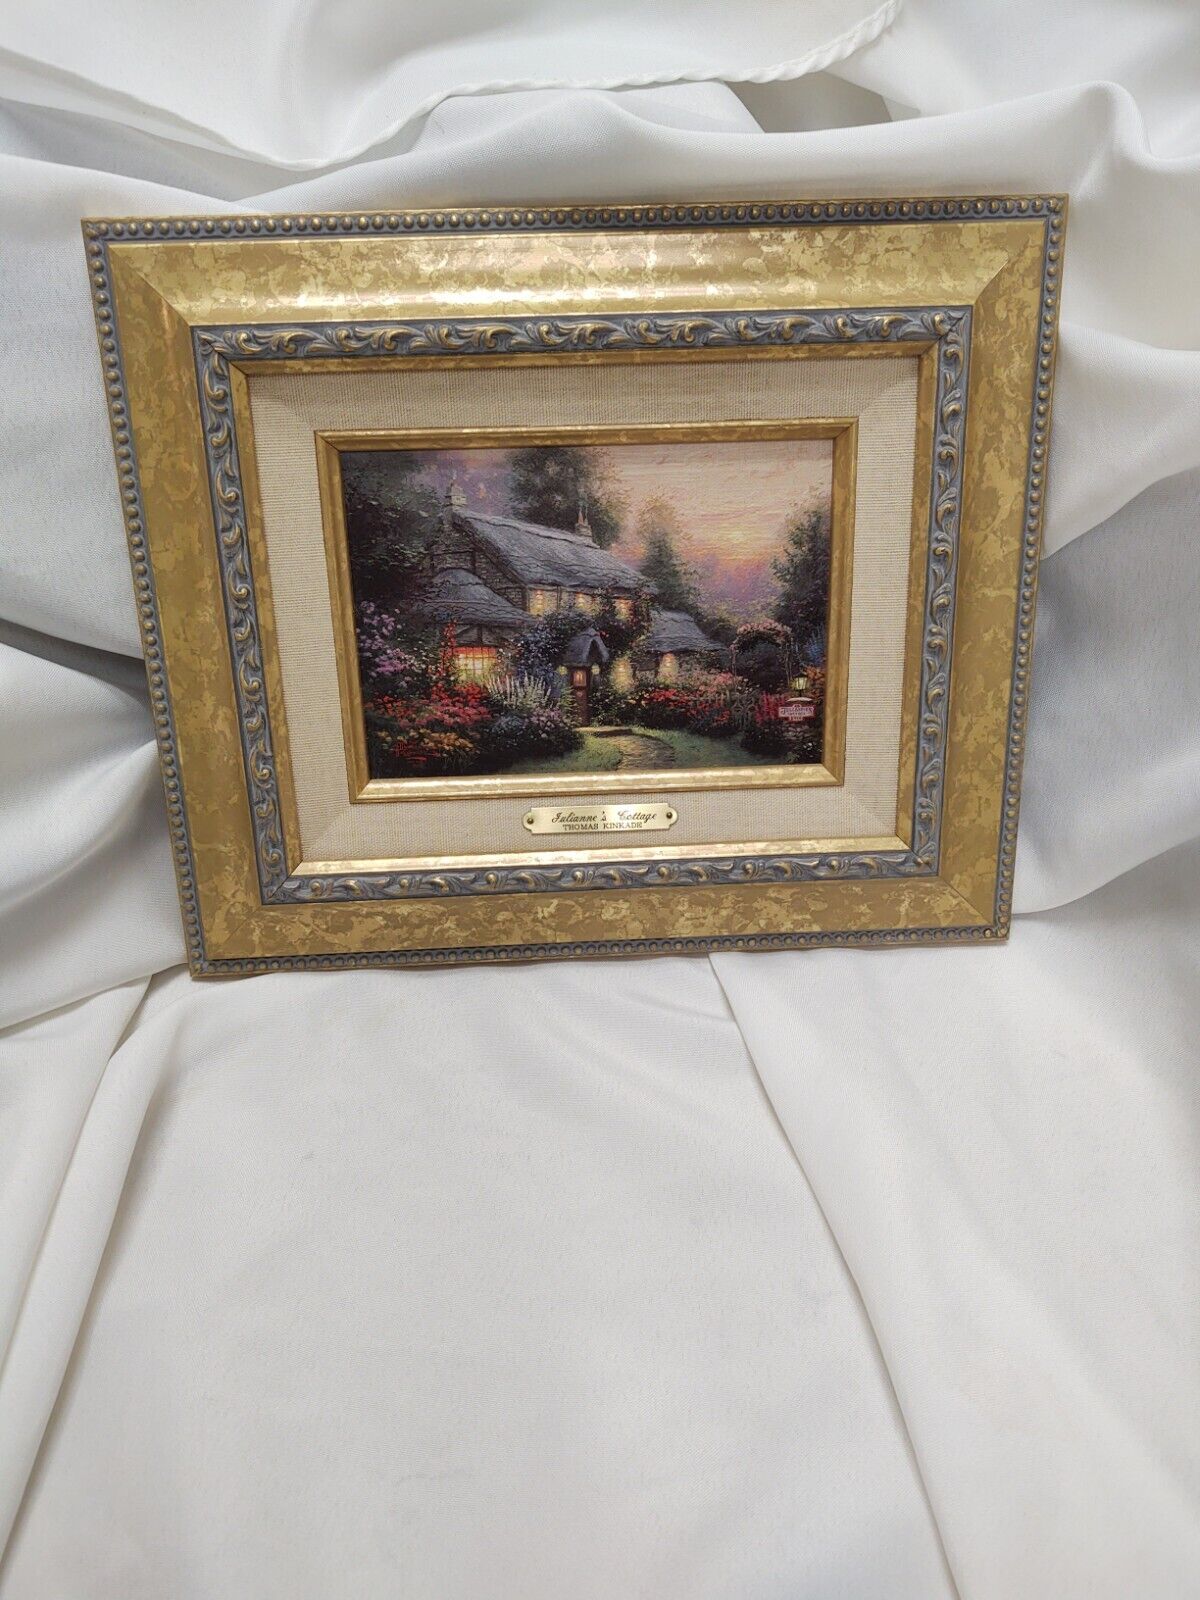 Julianne's Cottage Canvas Painting by Thomas Kinkade in 12x10 Gold Frame and COA